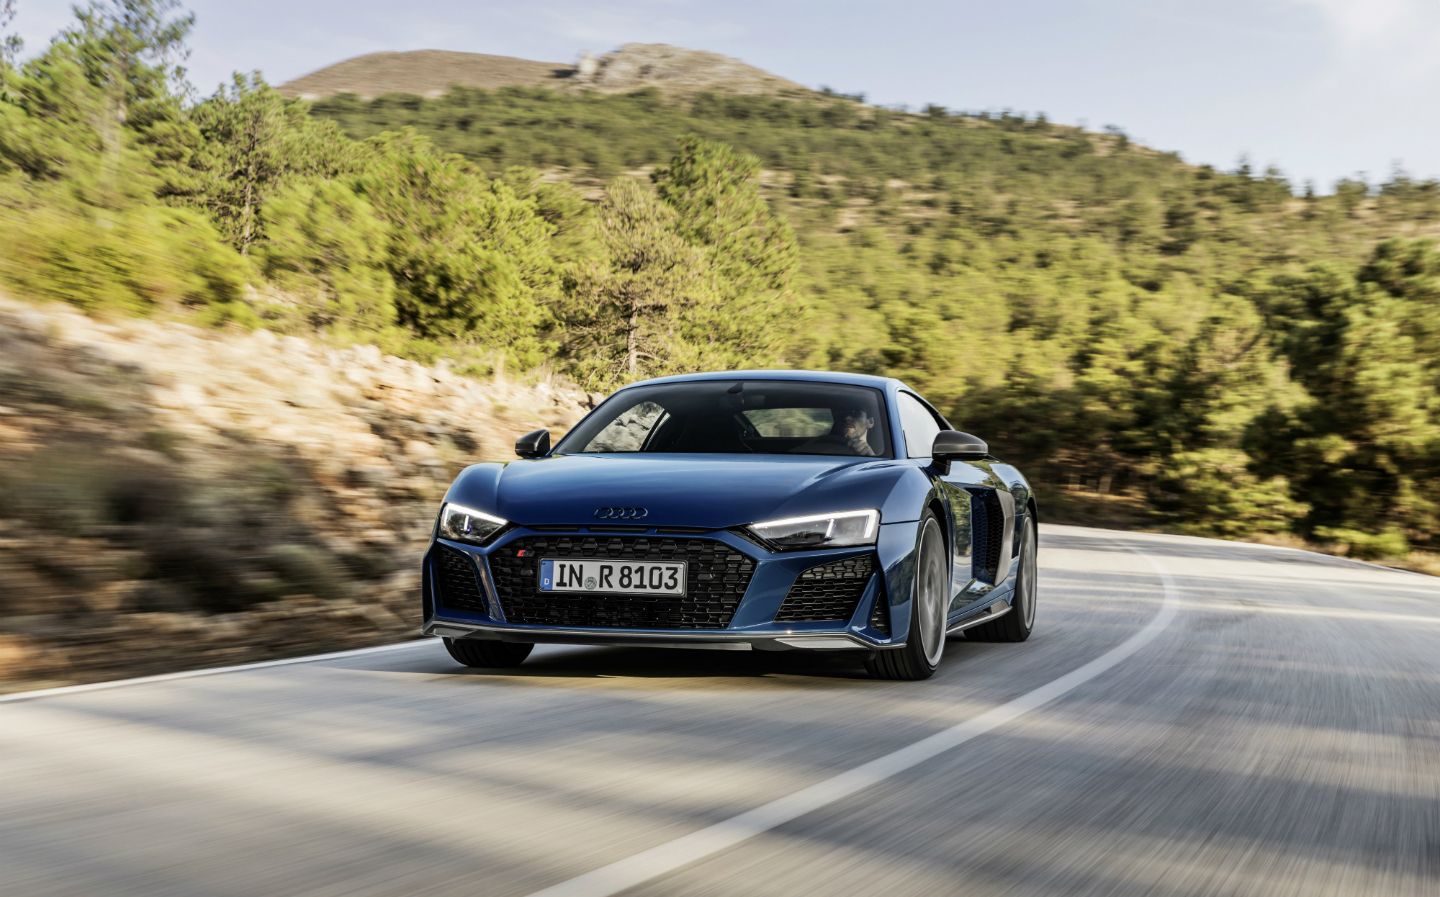 2020 Audi R8 V10 Performance Review: Old but Still Exciting